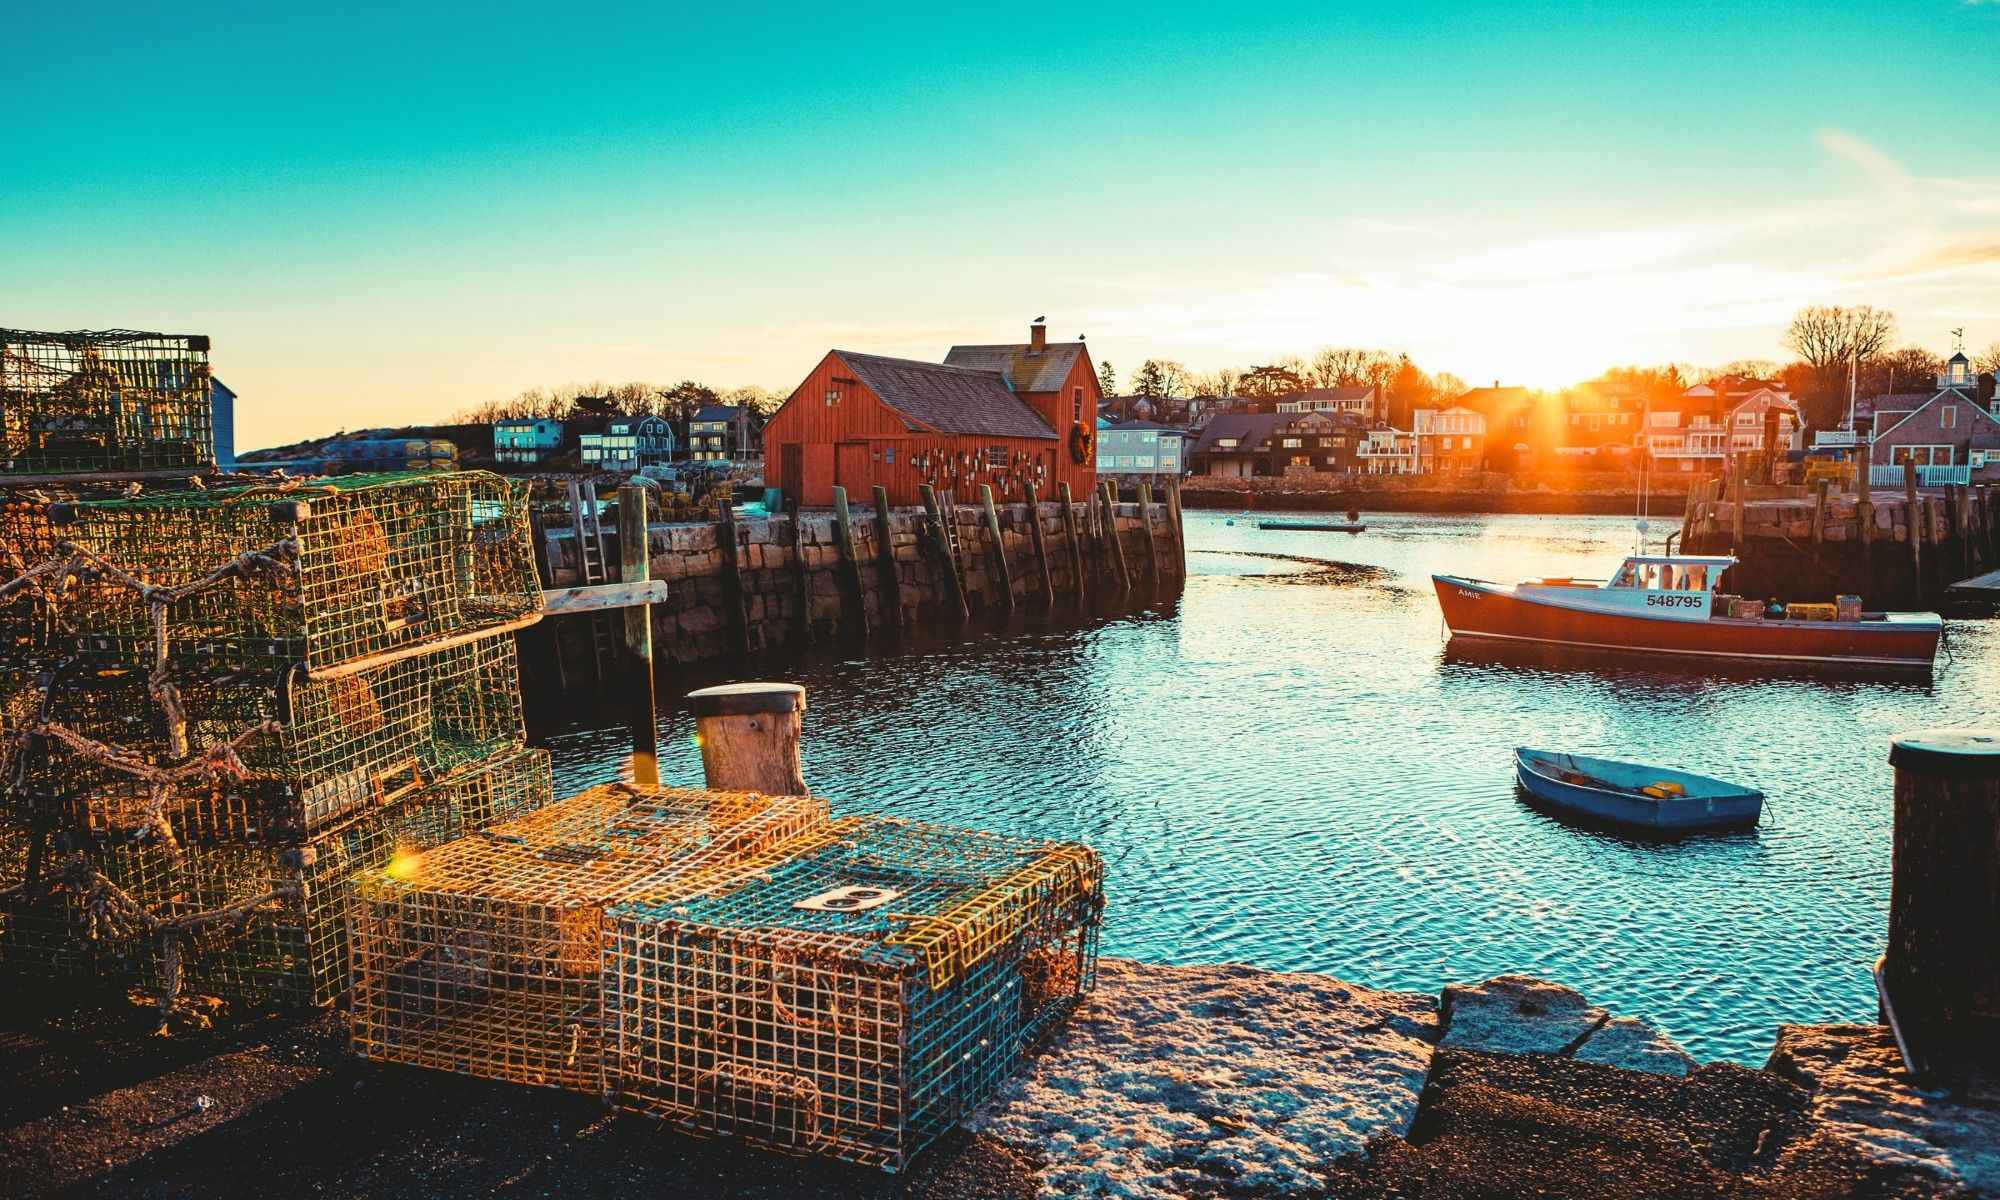 Rockport, MA Fishing: Artistic Seaside Town with Great Offshore Fishing Opportunities